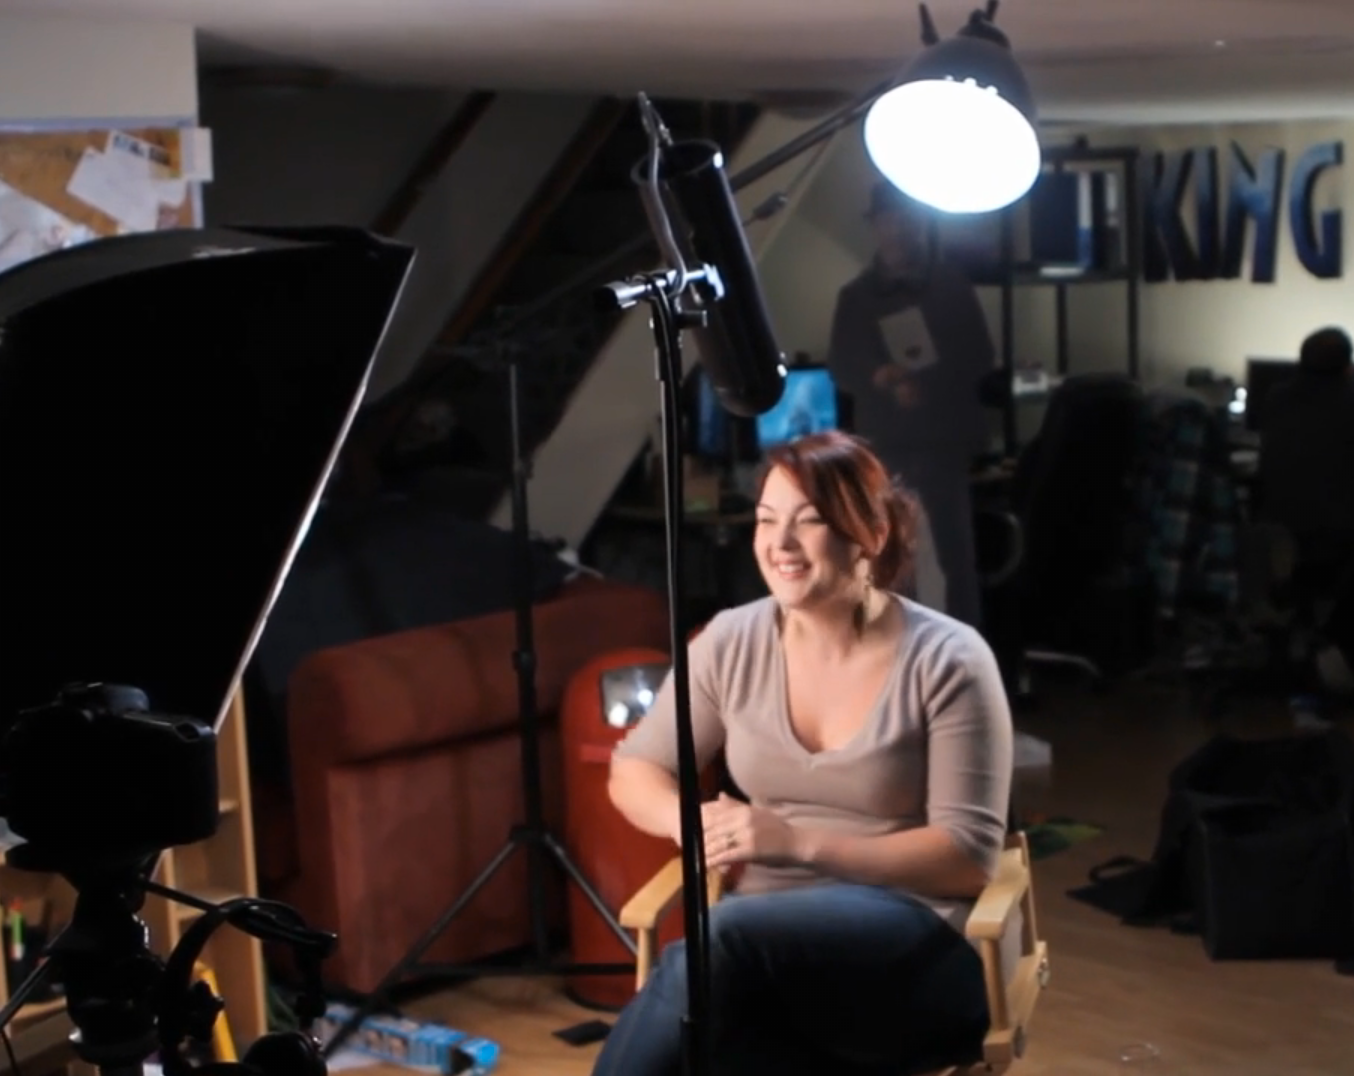 Two Interview Lighting Tutorials That'll Kick Your Footage Up a Notch